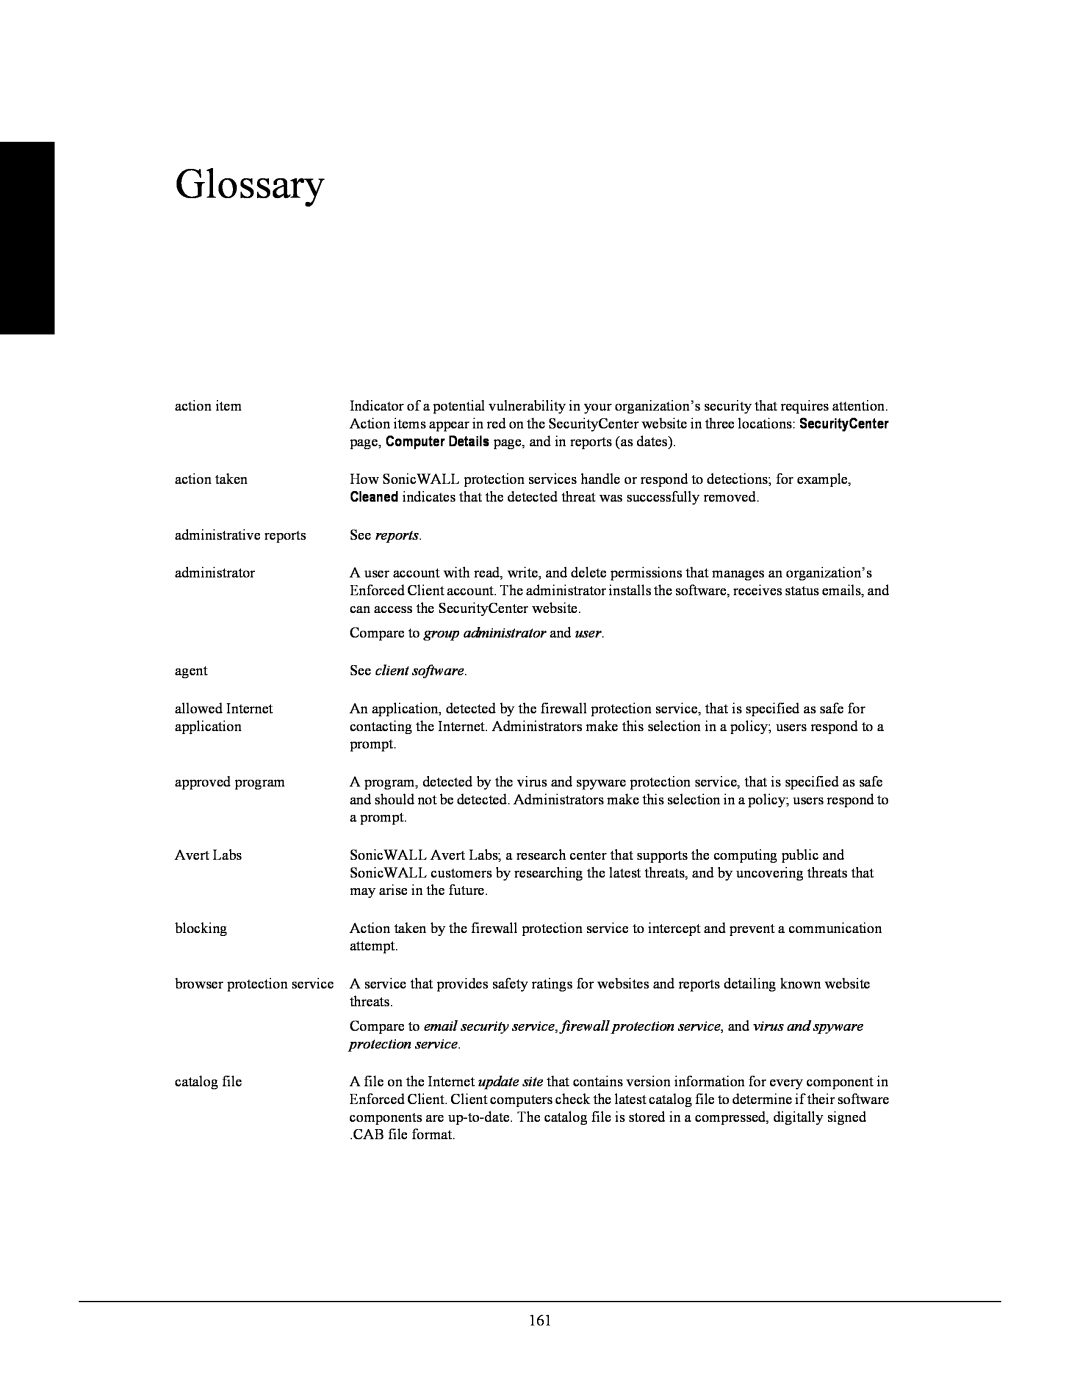 SonicWALL 4.5 Glossary, See reports, Compare to group administrator and user, See client software, protection service 